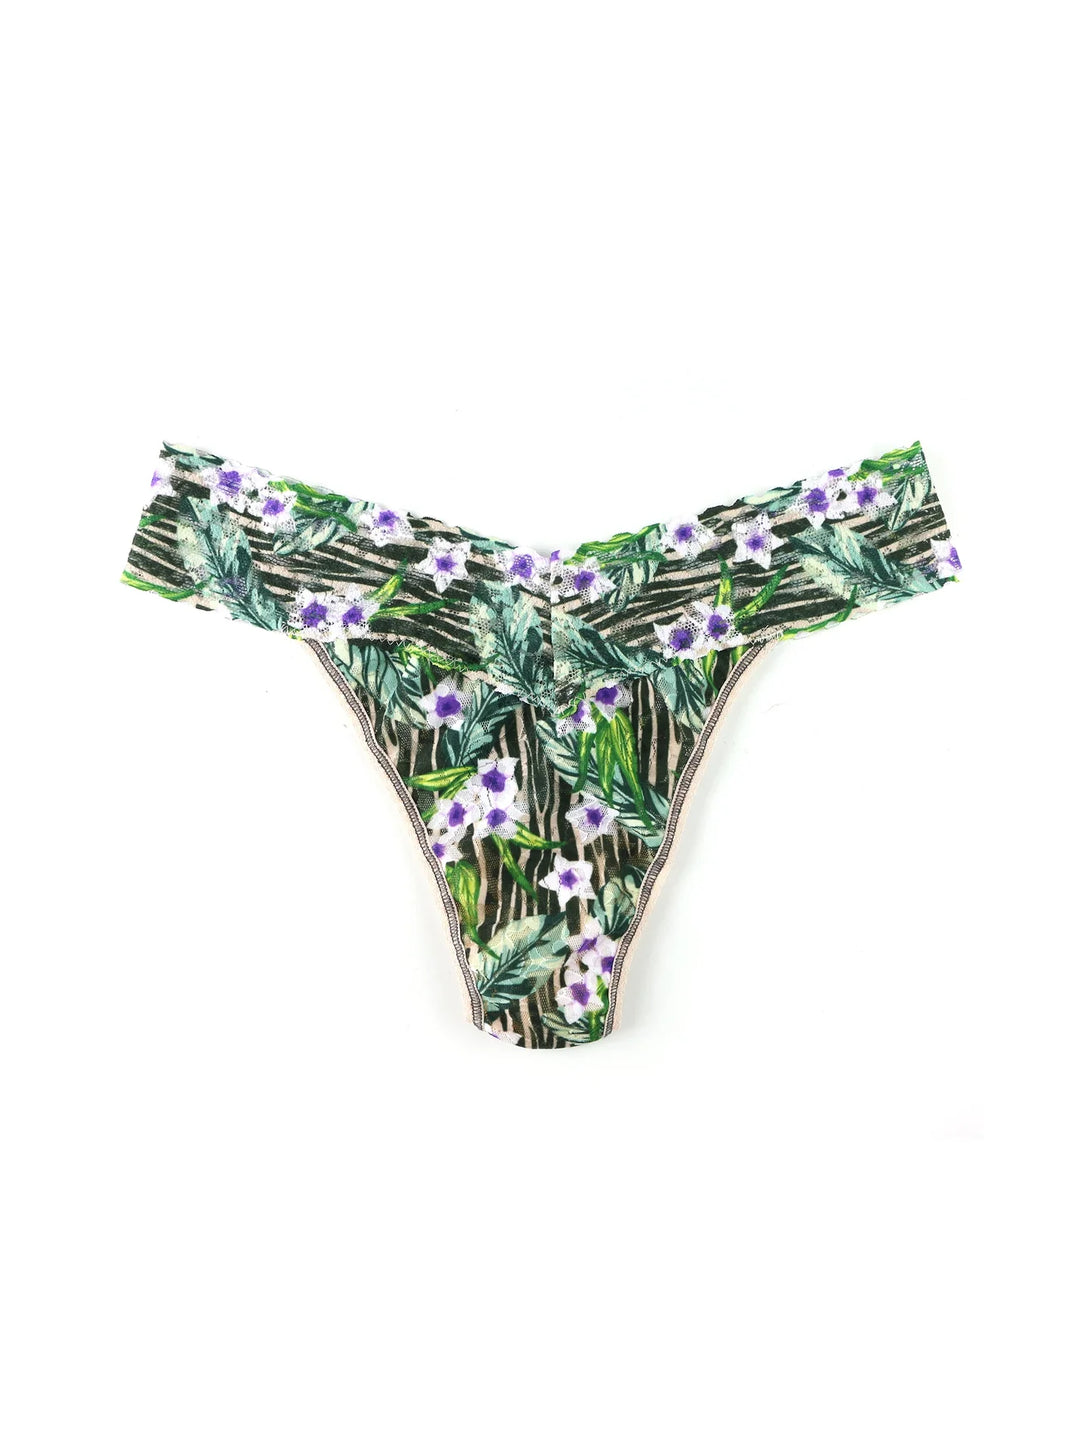 HANKY PANKY PRINTED LACE ORIGINAL RISE THONG - Expect Lace